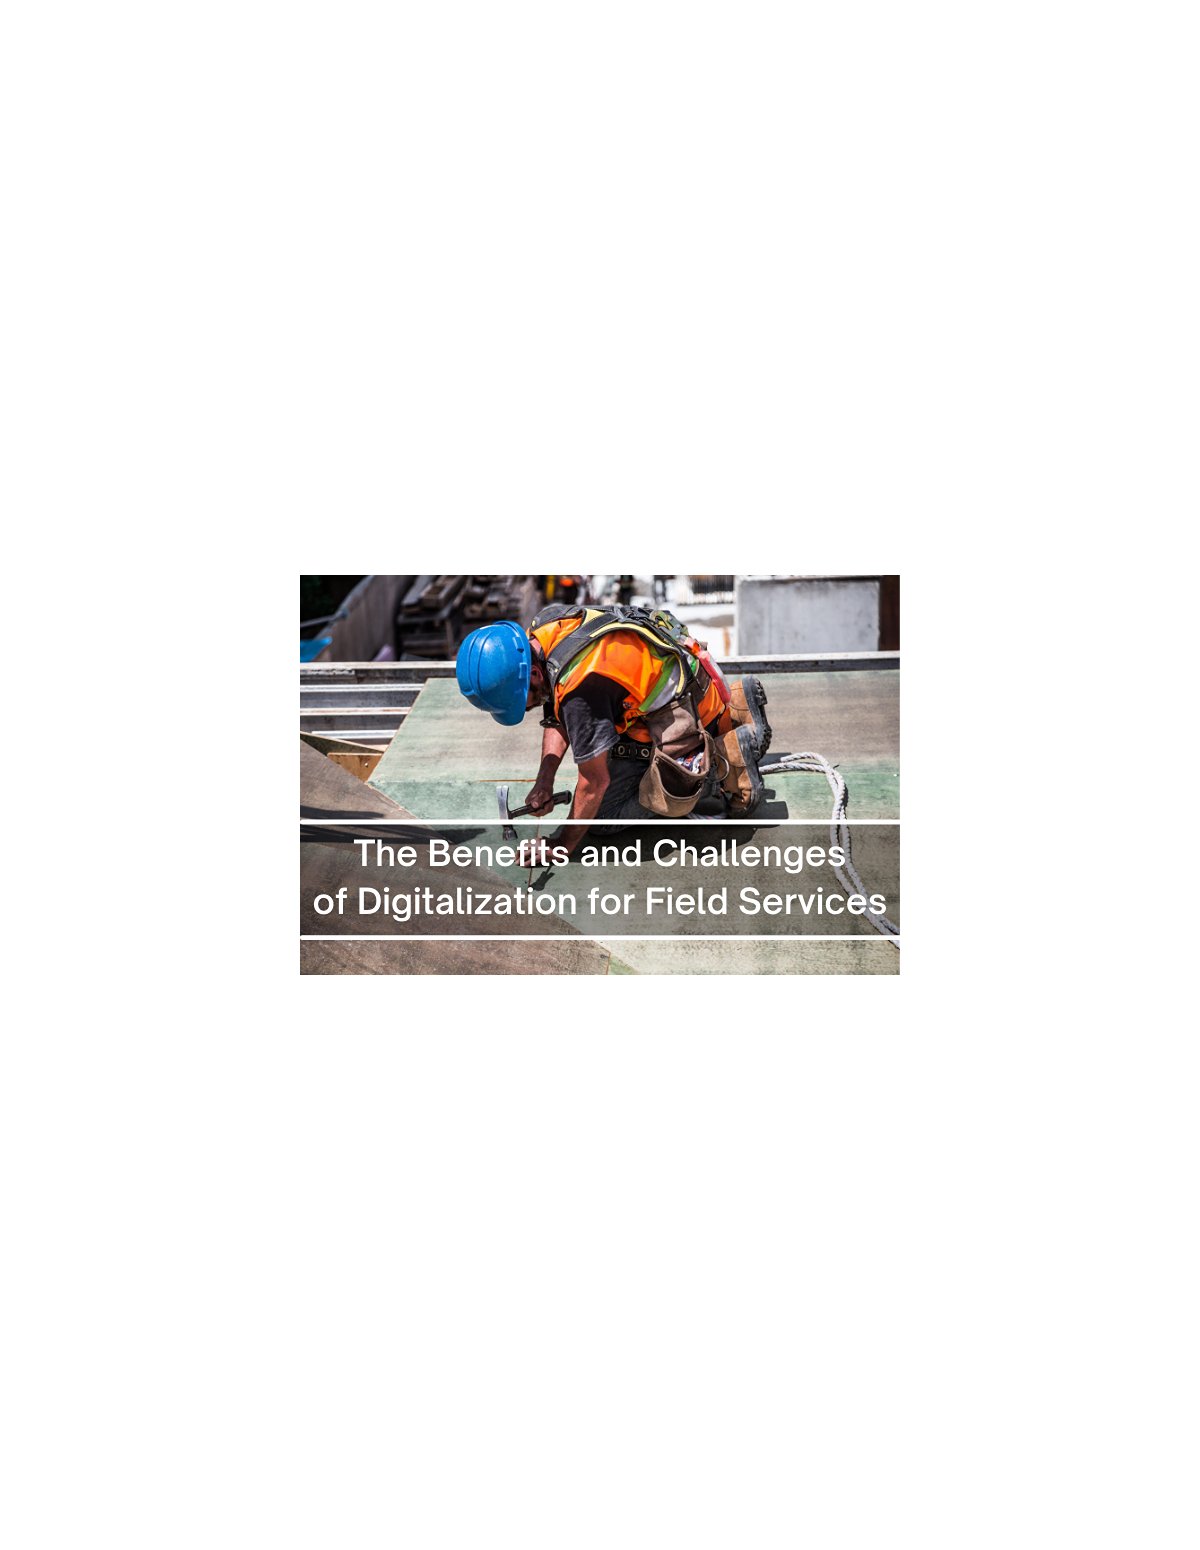 The Benefits and Challenges of Digitalization for Field Services